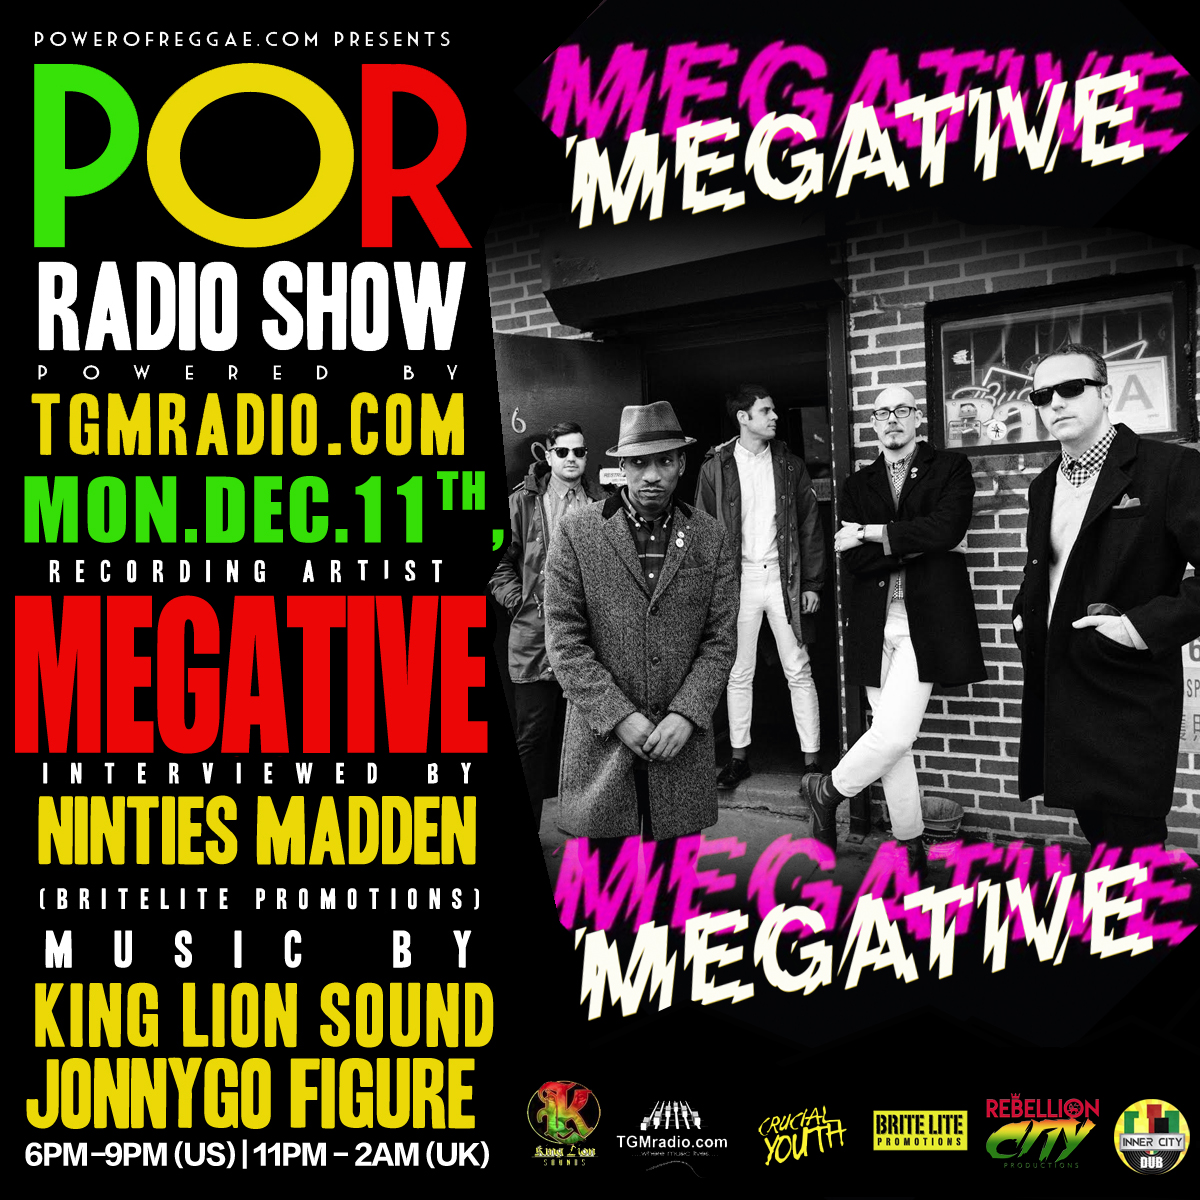 Megative Innerview on the Power of Reggae Radio Show